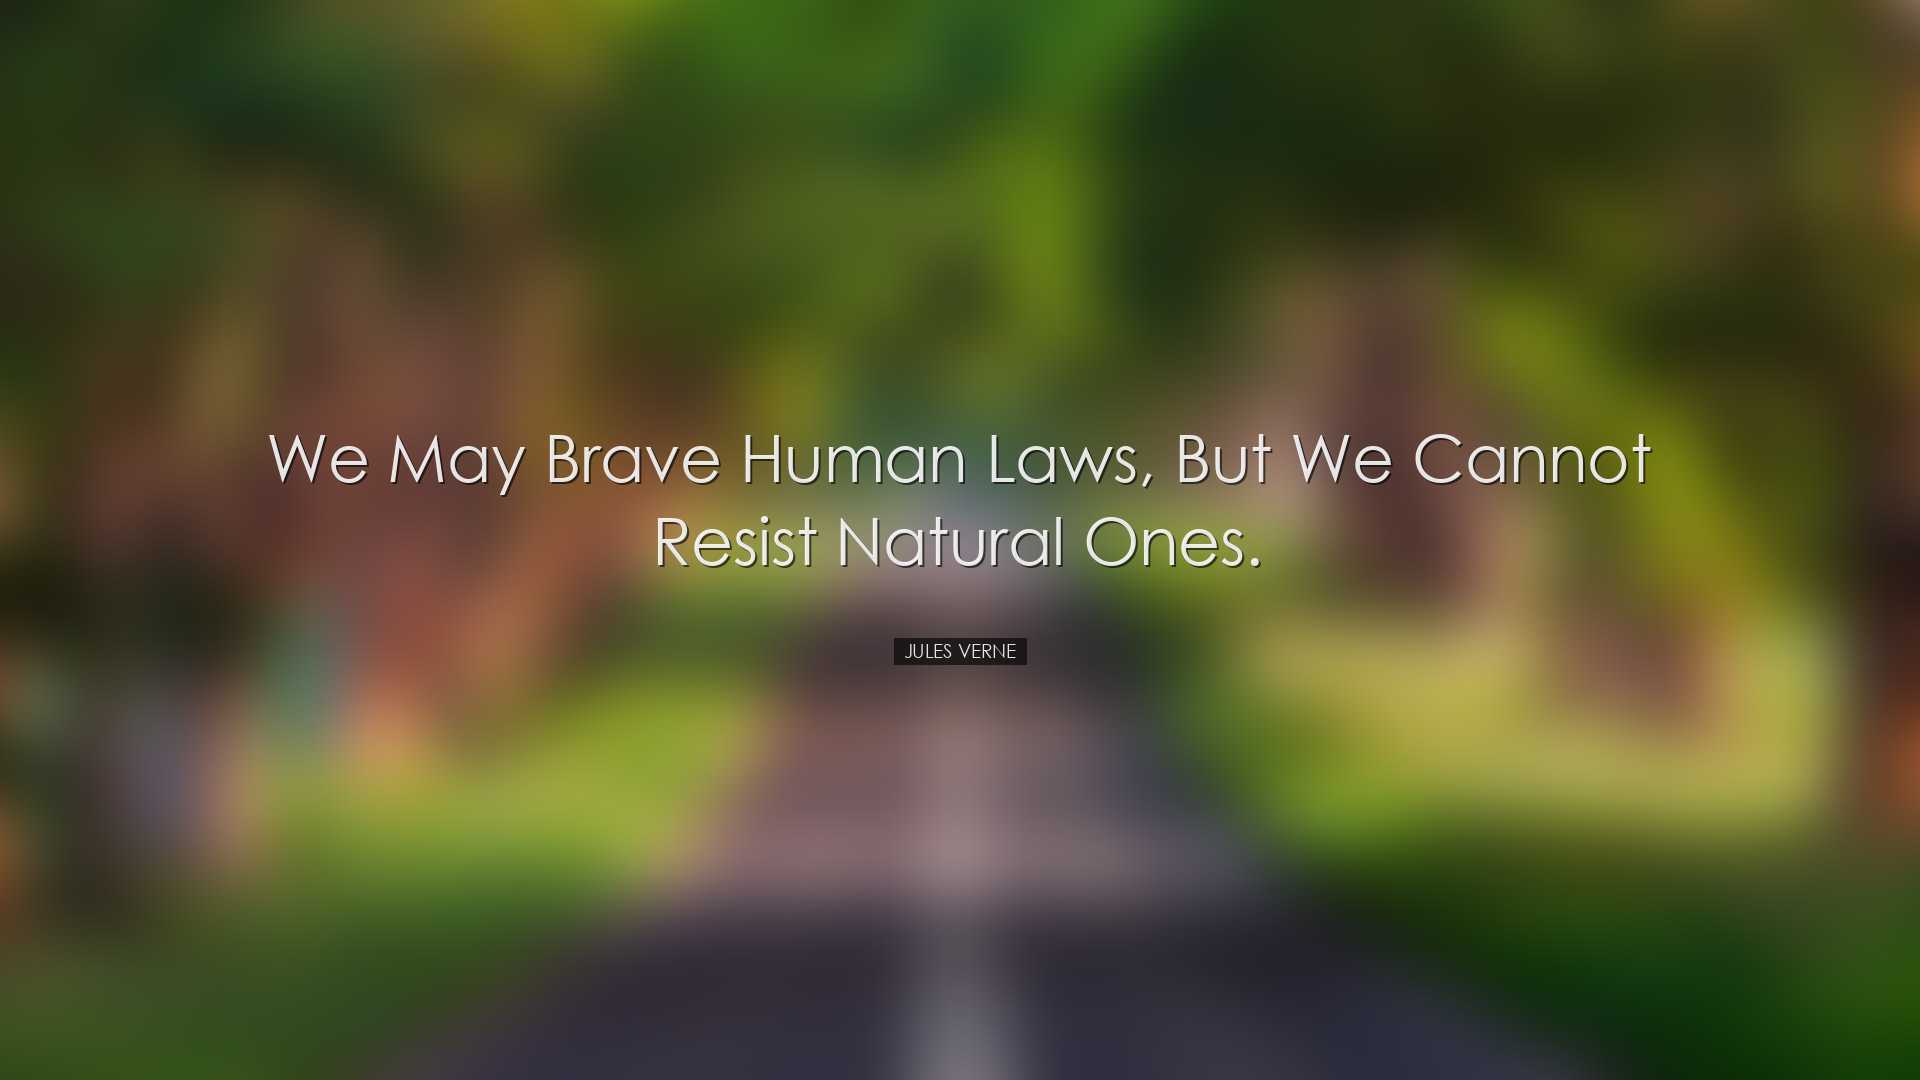 We may brave human laws, but we cannot resist natural ones. - Jule